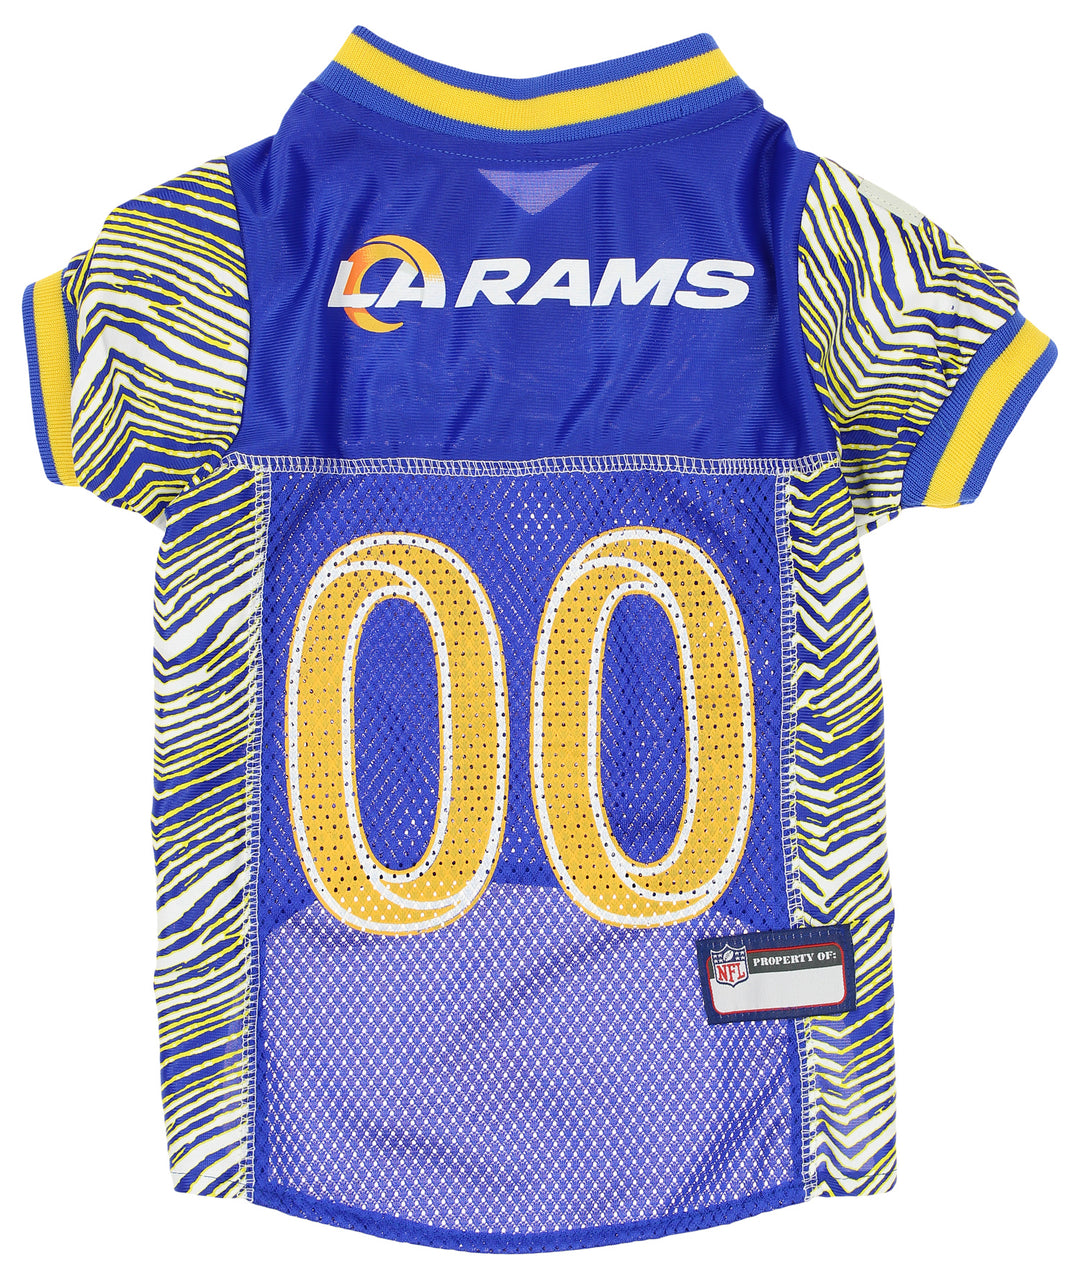 Zubaz X Pets First NFL Los Angeles Rams Jersey For Dogs & Cats